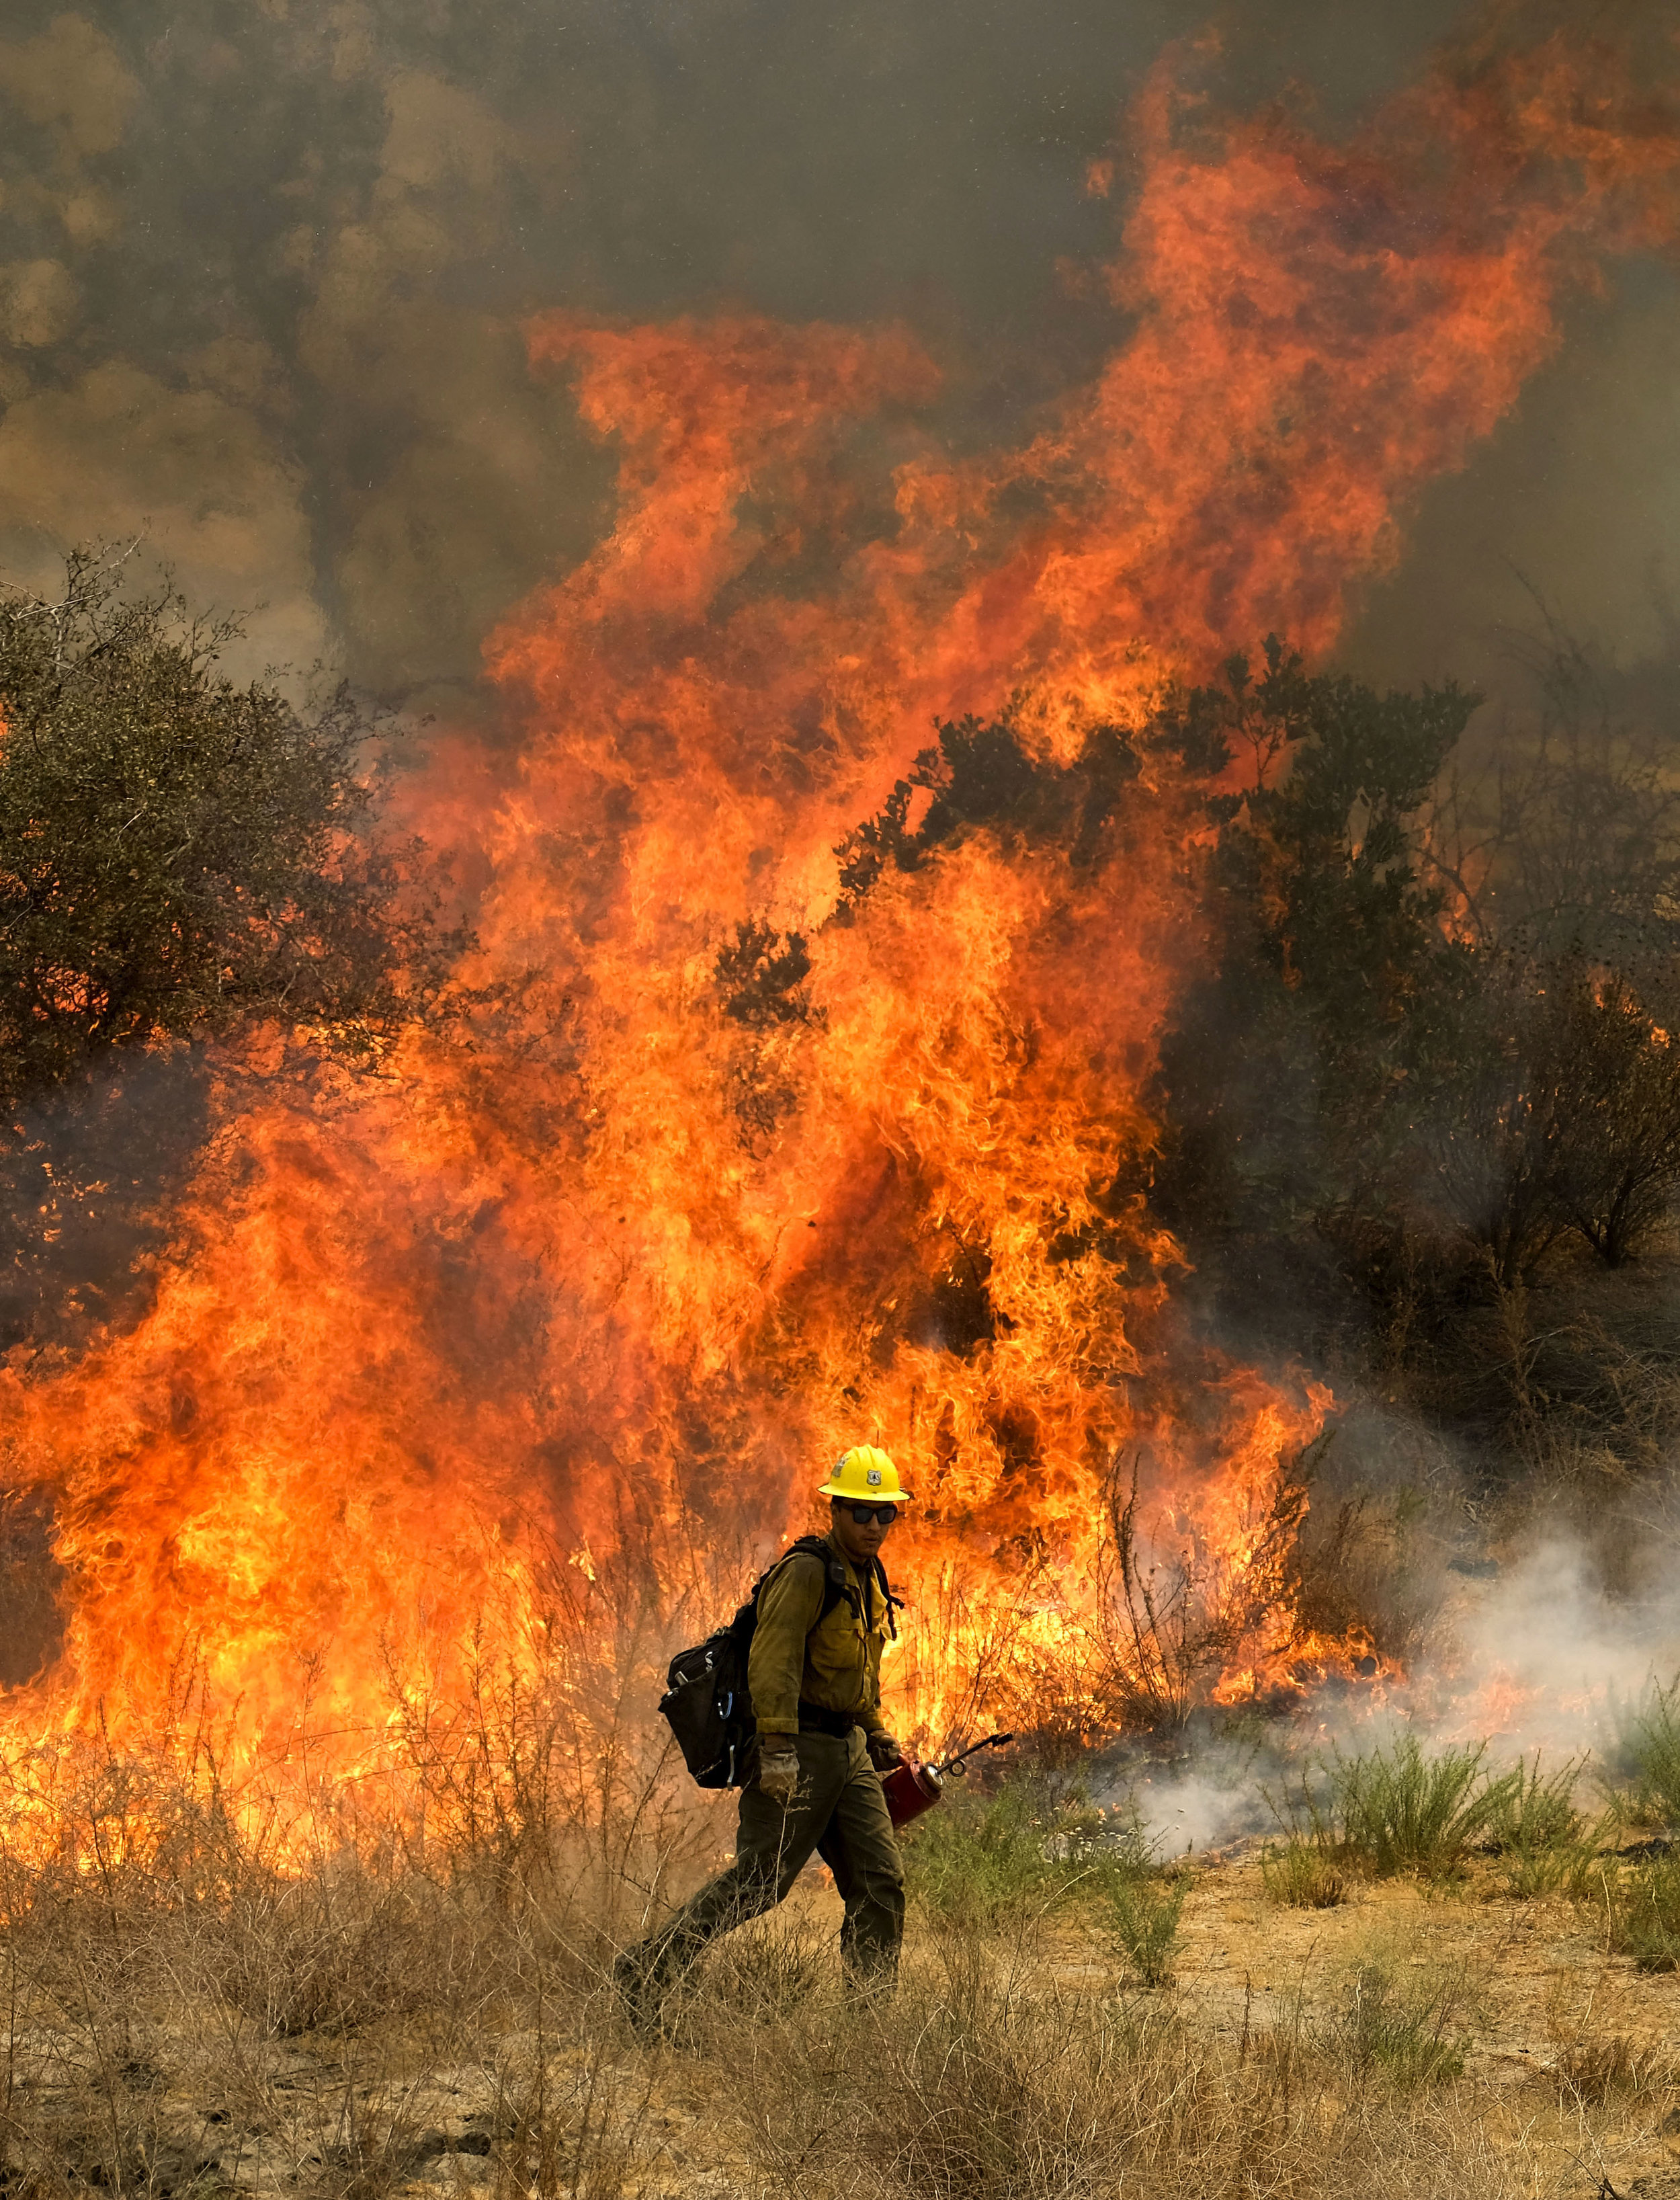  A firefighter battles the Holy Fire burning in the Cleveland National Forest in Lake Elsinore, California on Friday, Aug. 10, 2018.  